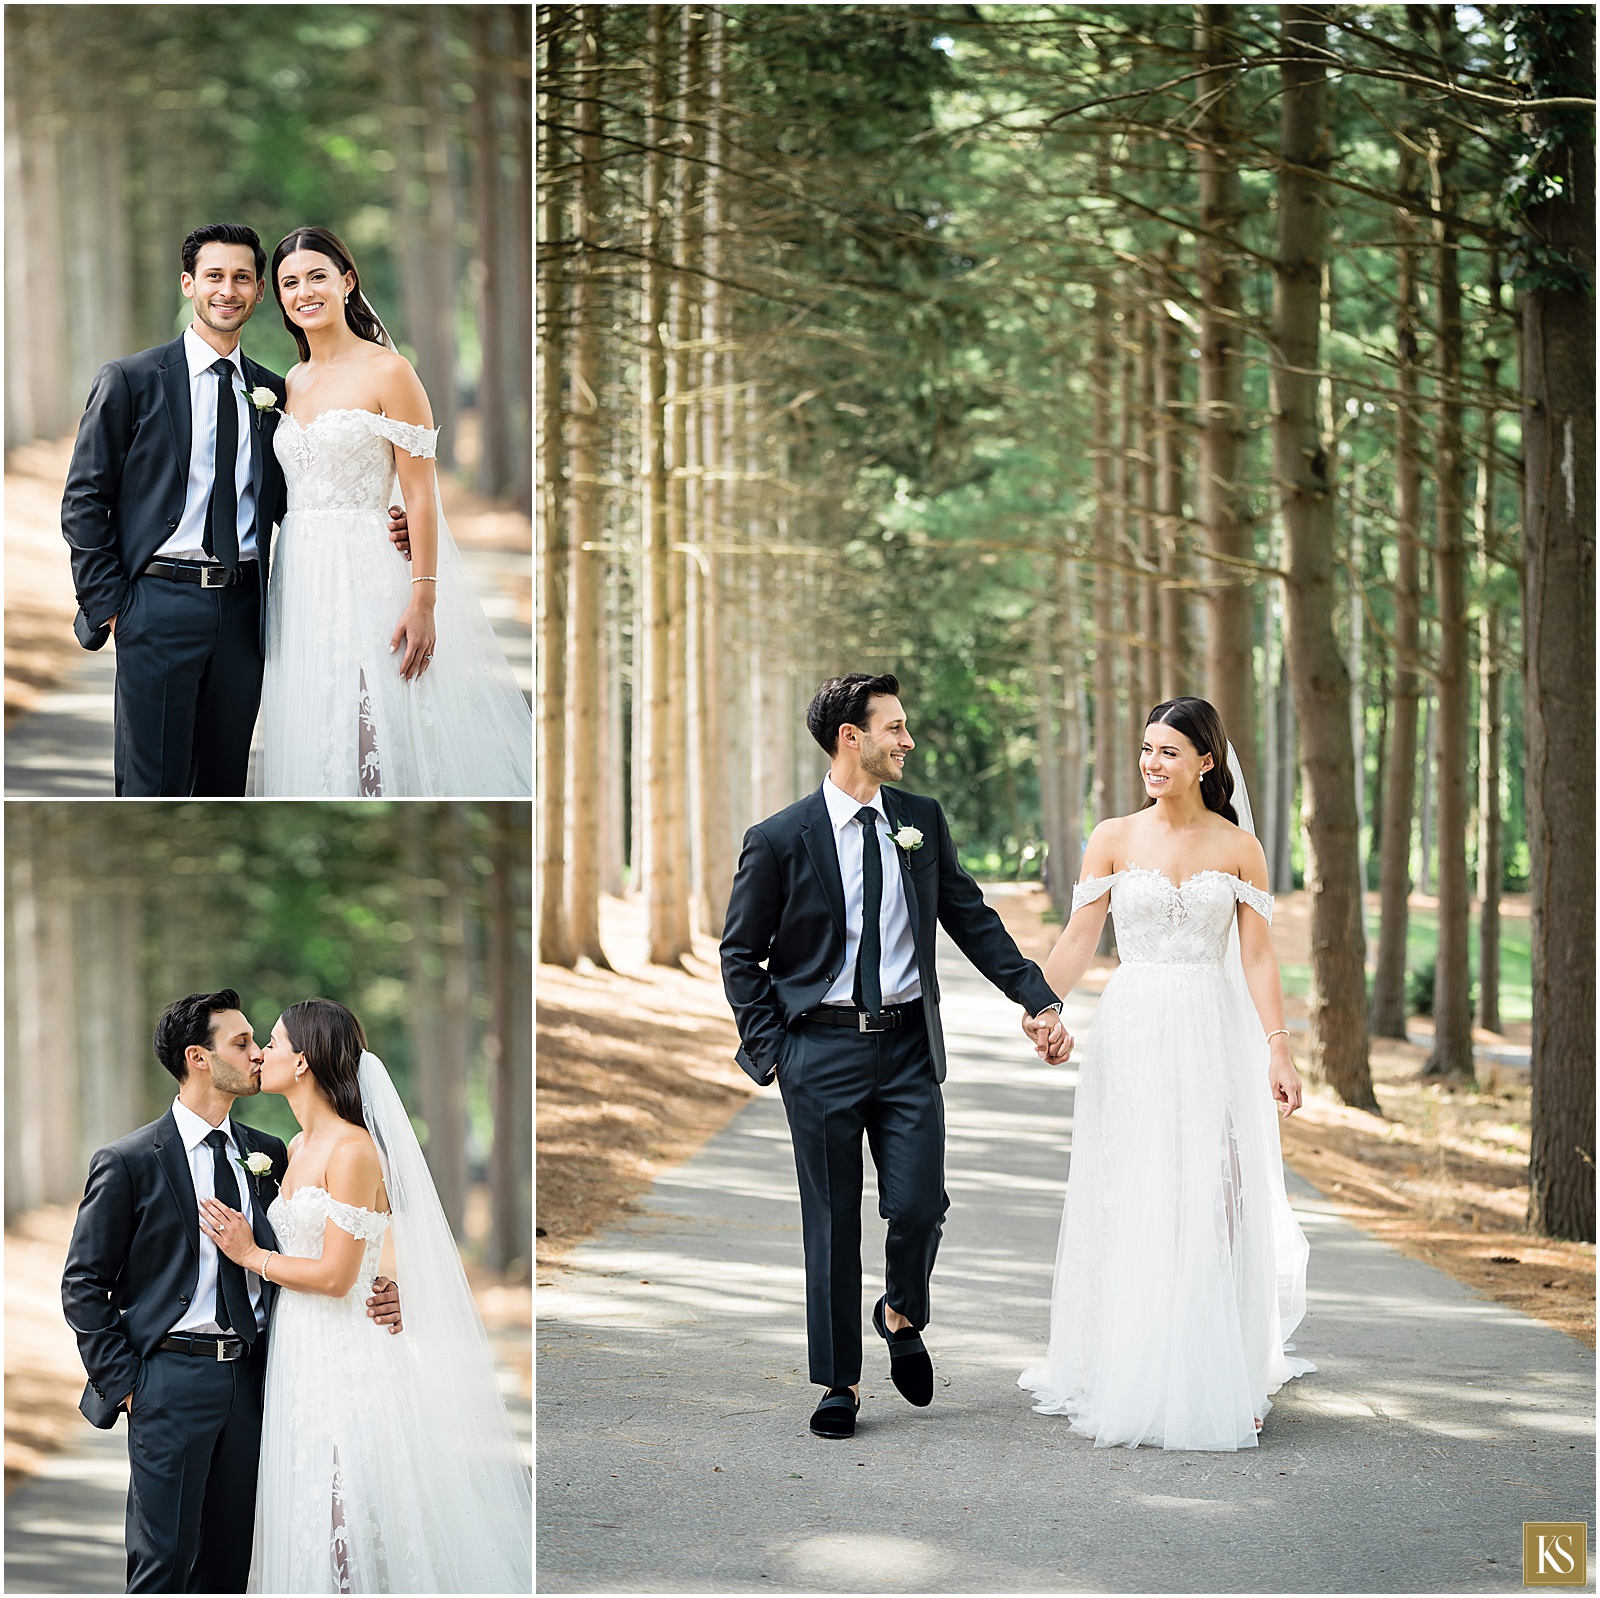 Shepherds Hollow Wedding Pictures in the Pine Trees